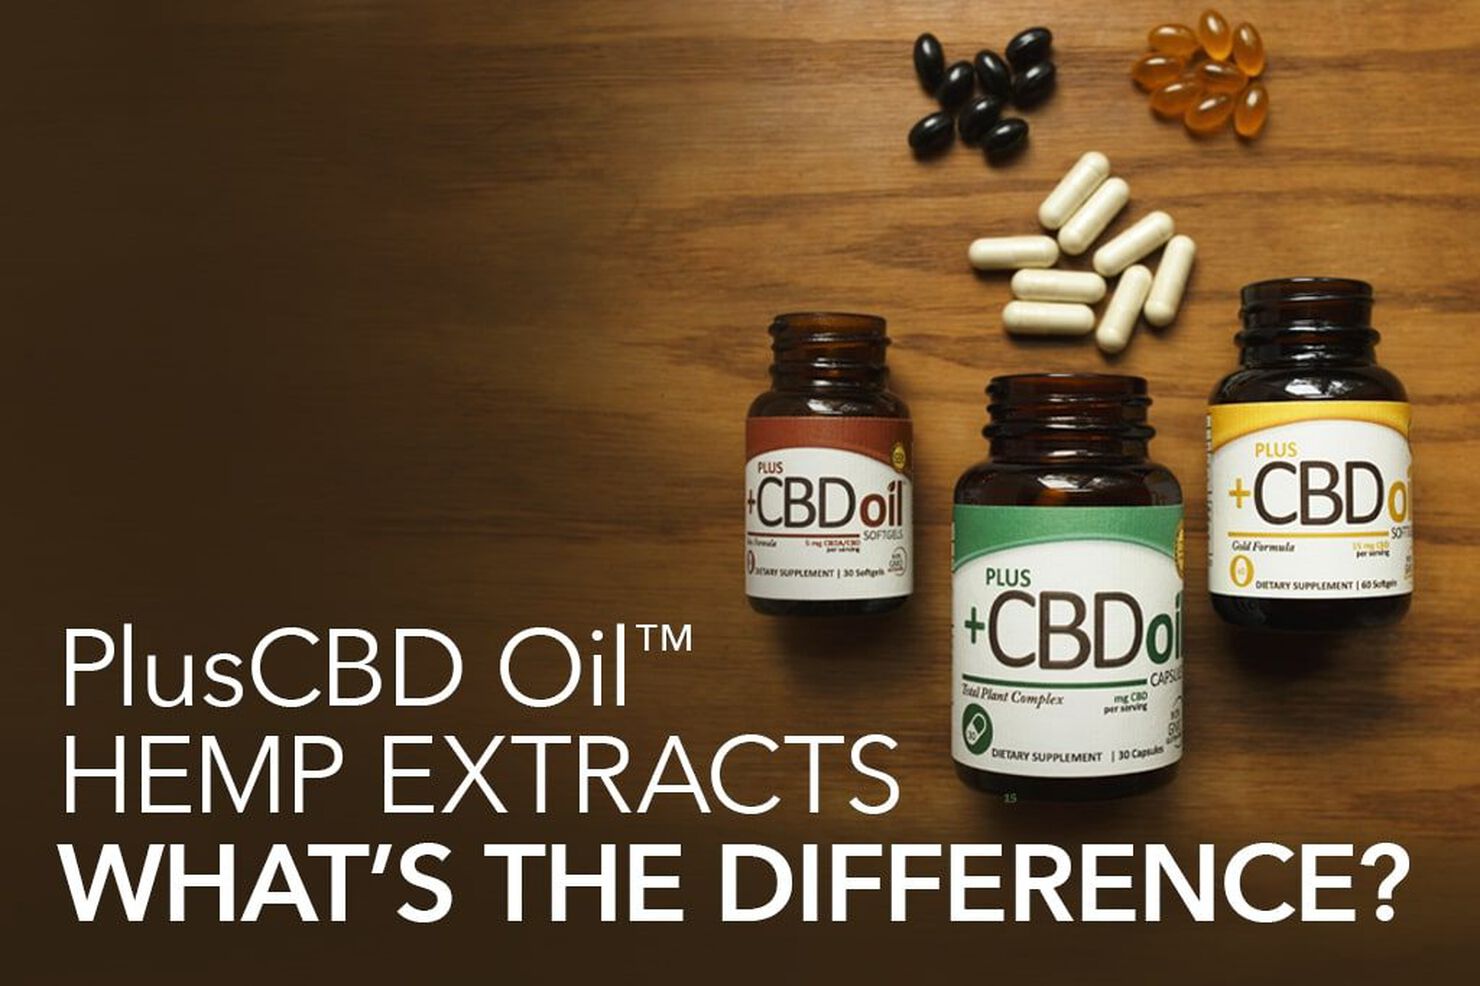 PlusCBD™ Oil Full Spectrum Hemp Extracts: What’s the difference?